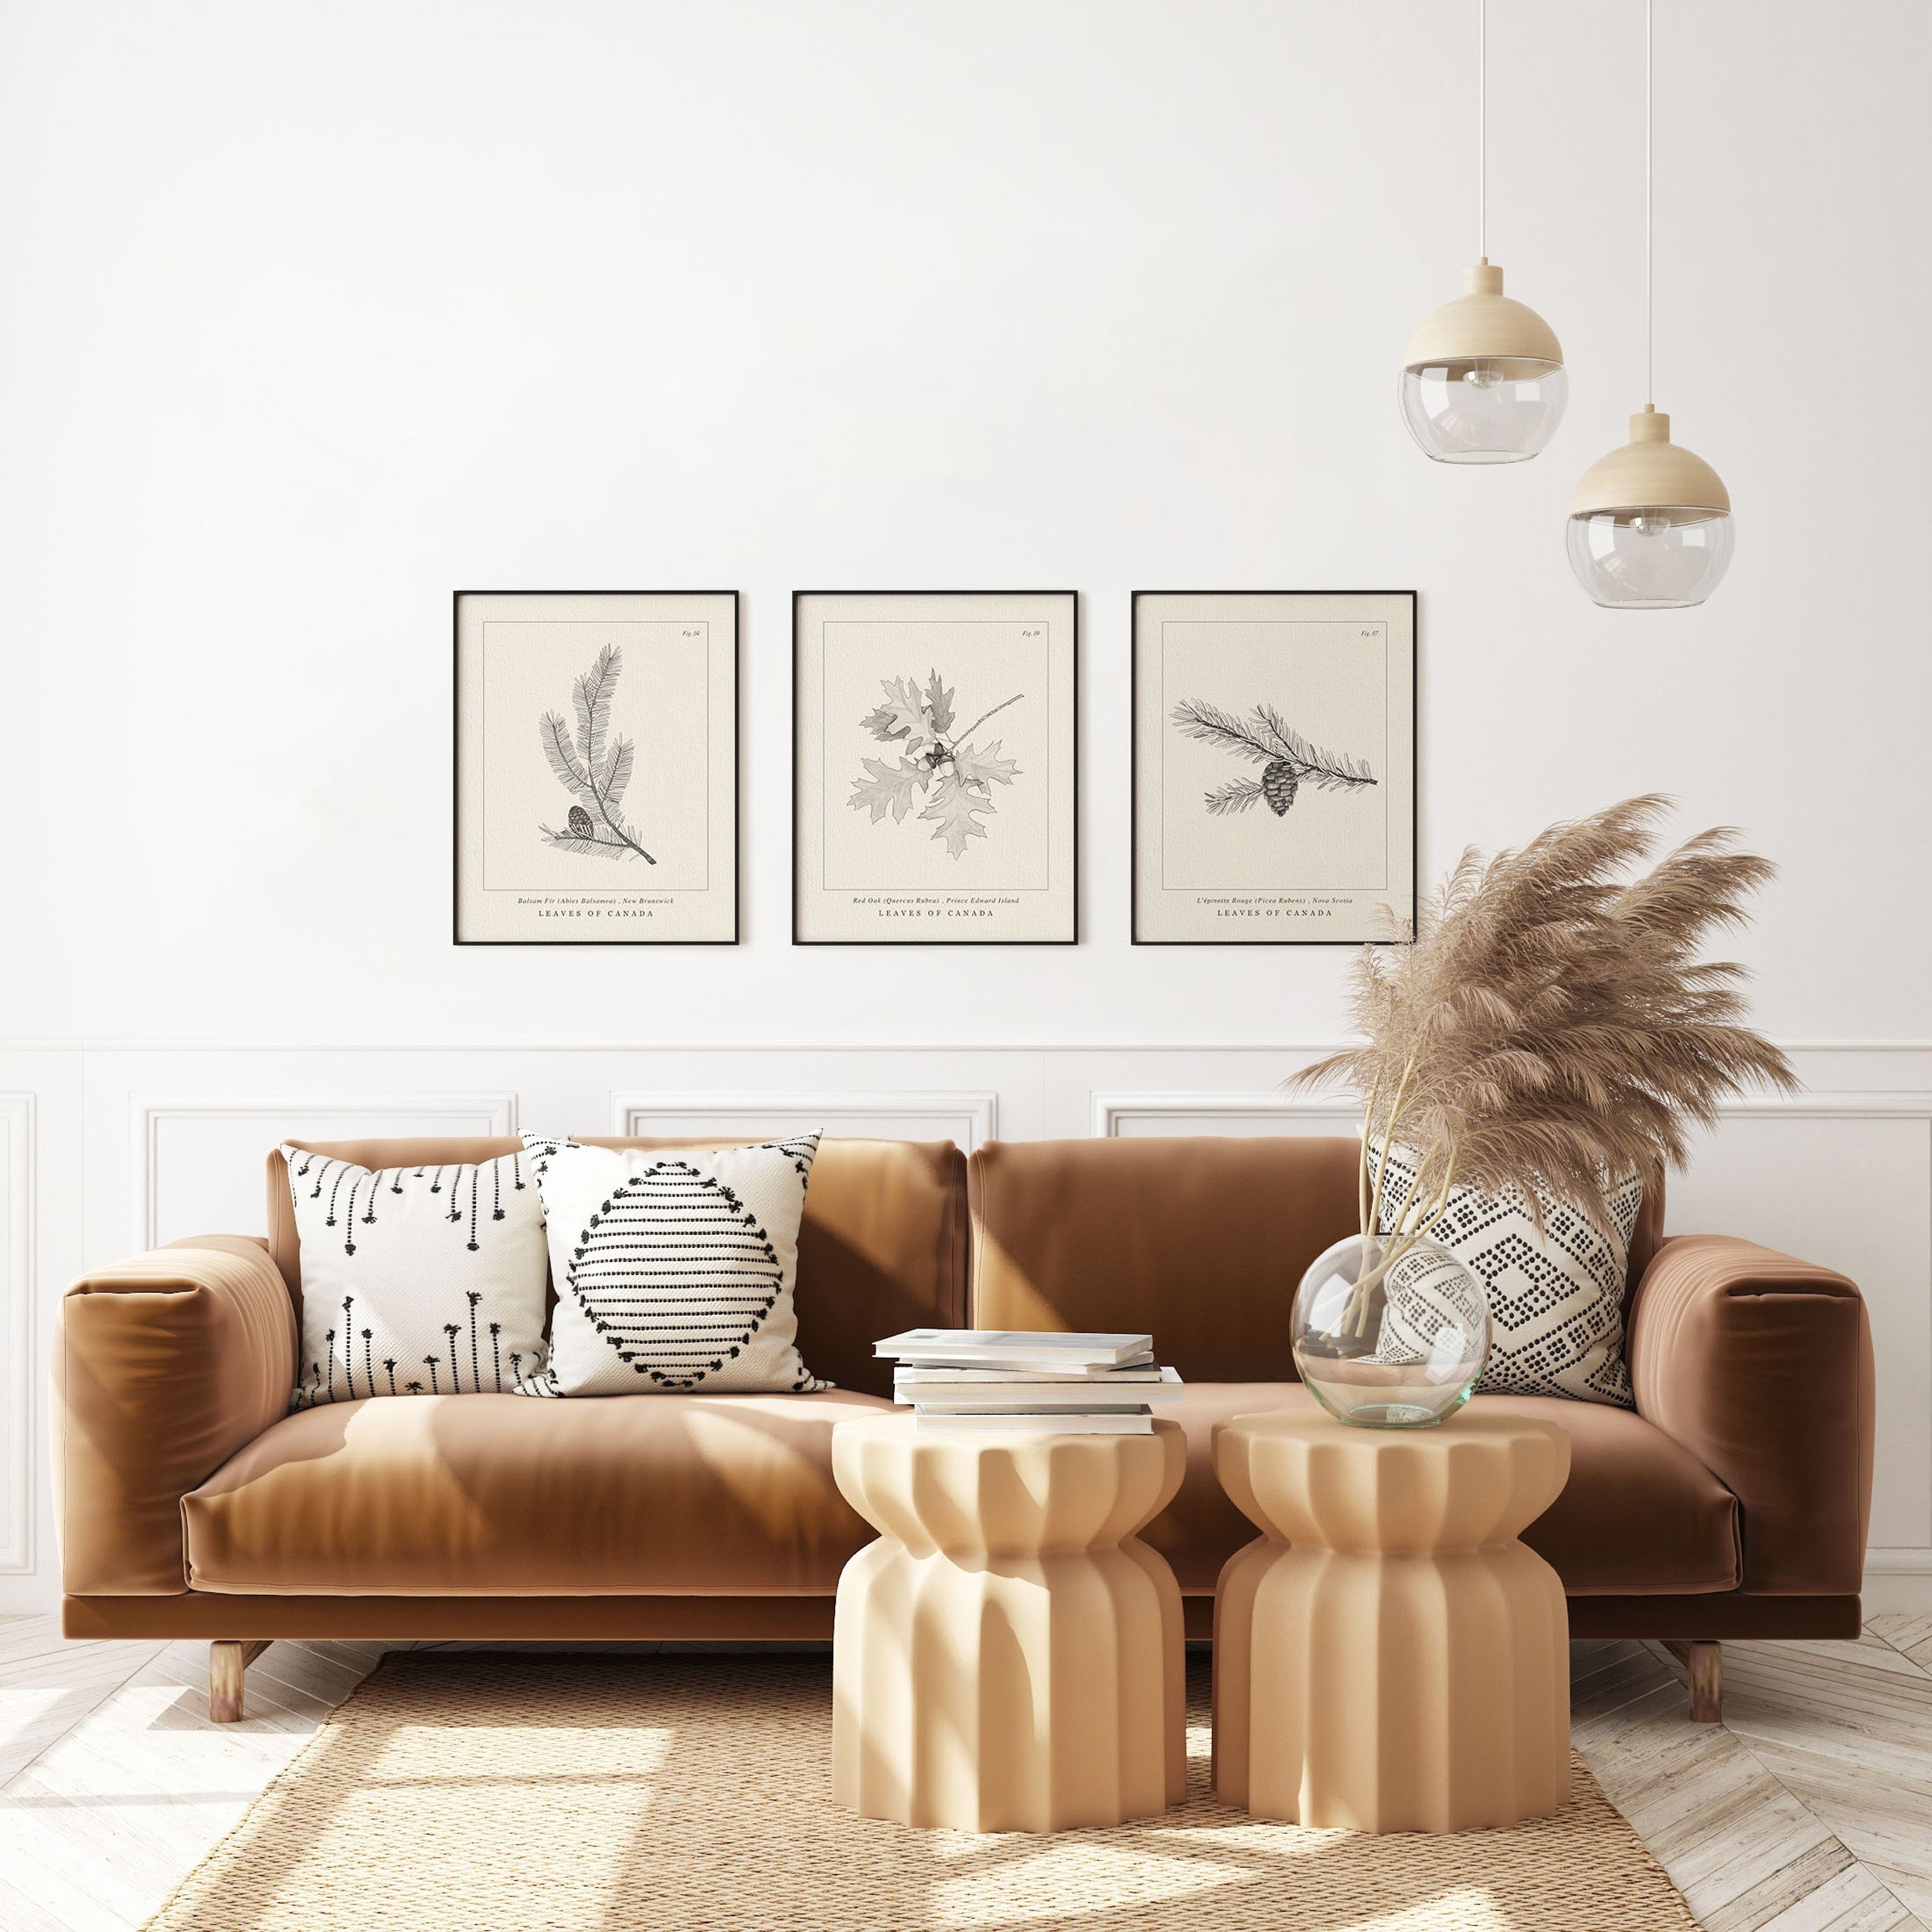 Three Canadian botanical wall illustrations in black frames are hanging on a white background above a brown couch with three cushions on it